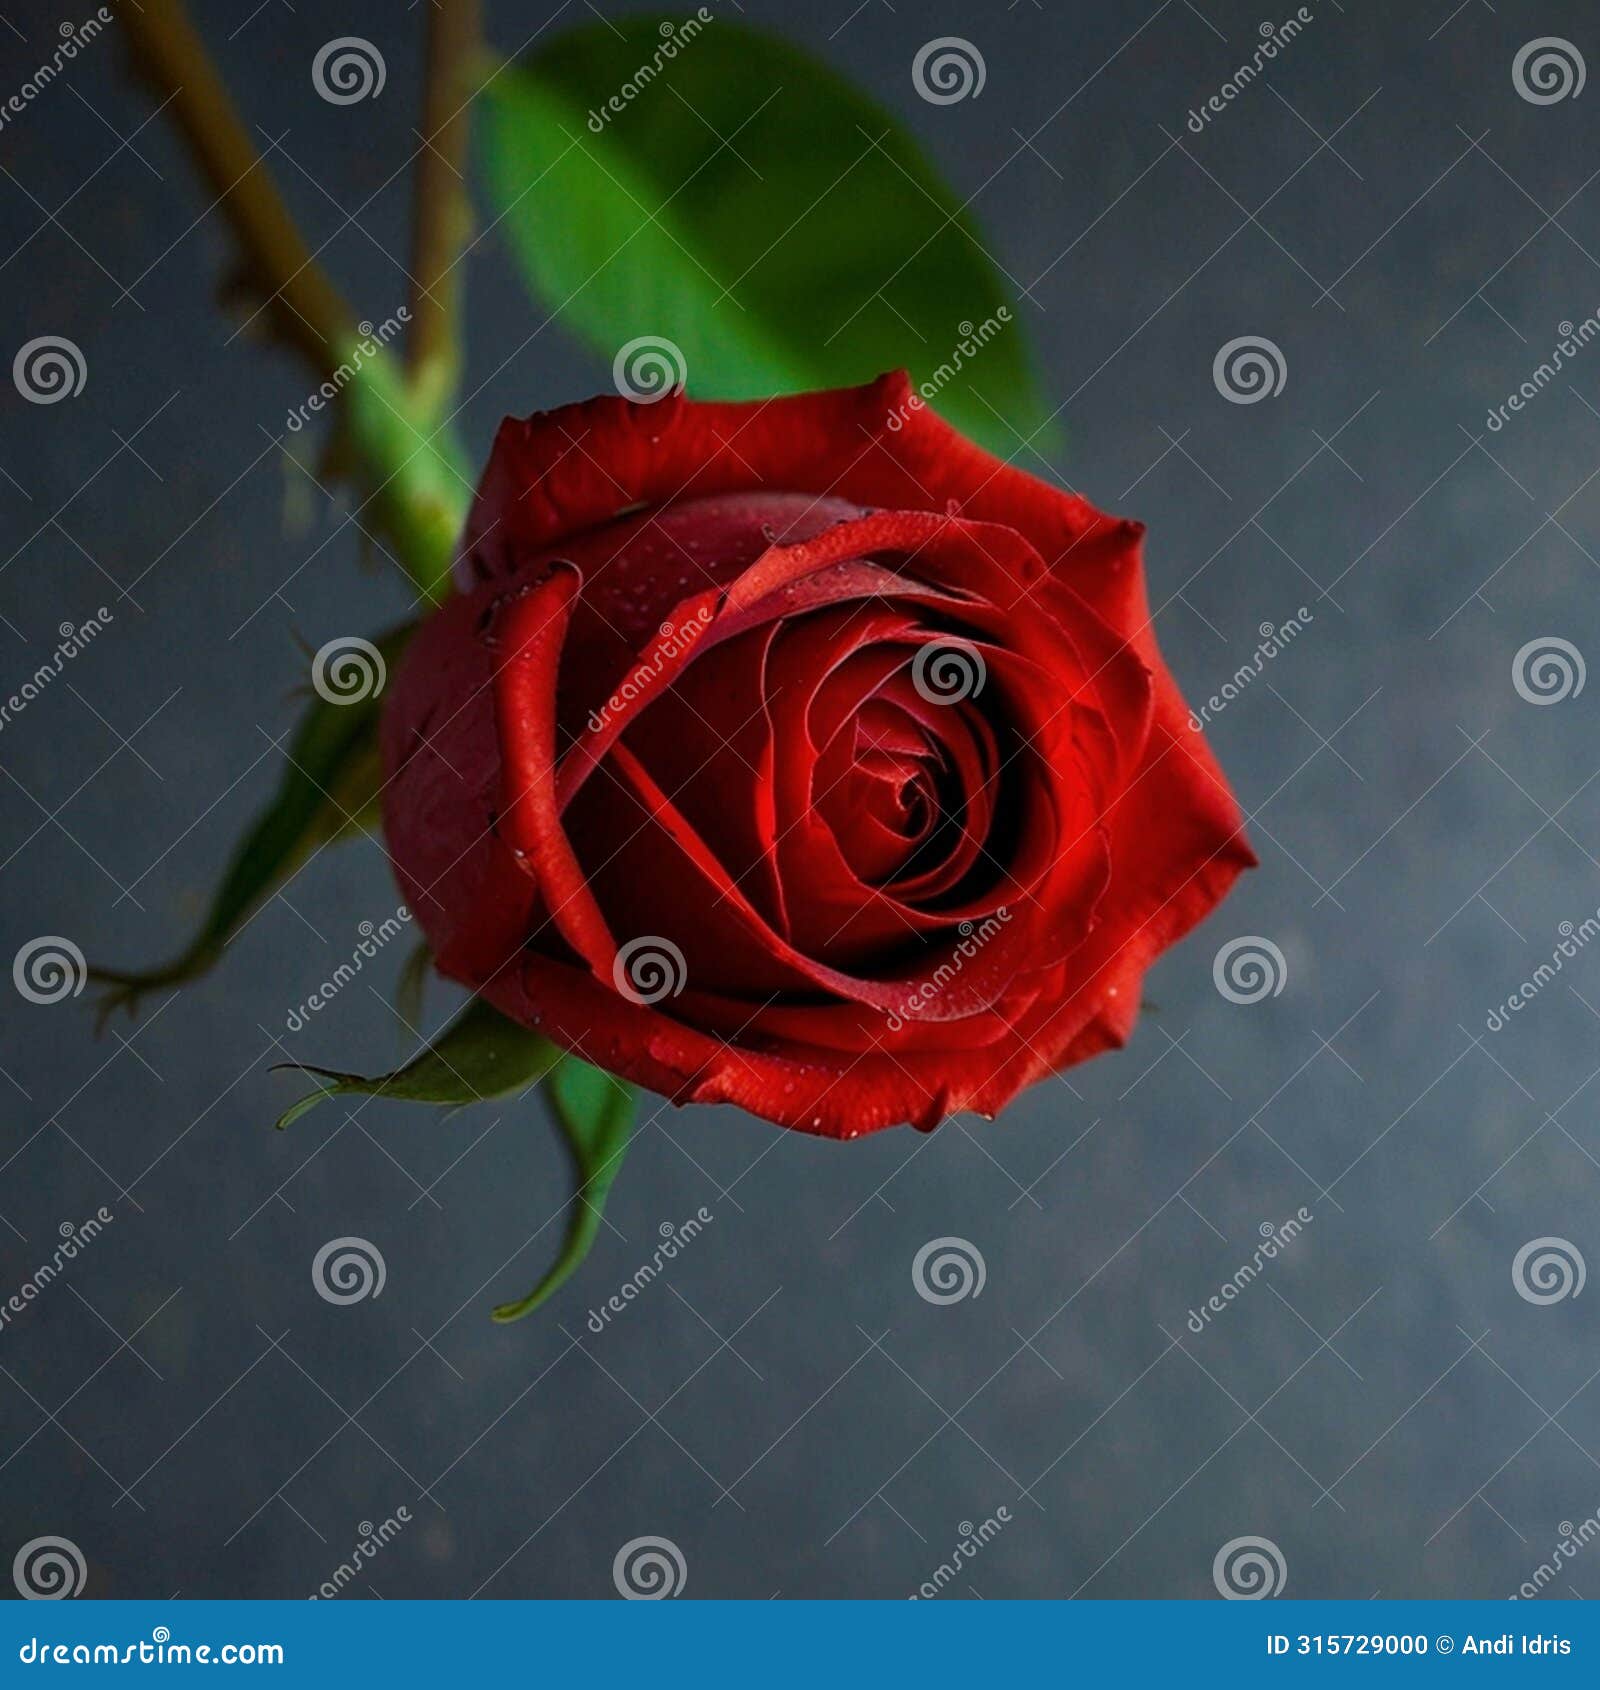 the beutiful red rose flower